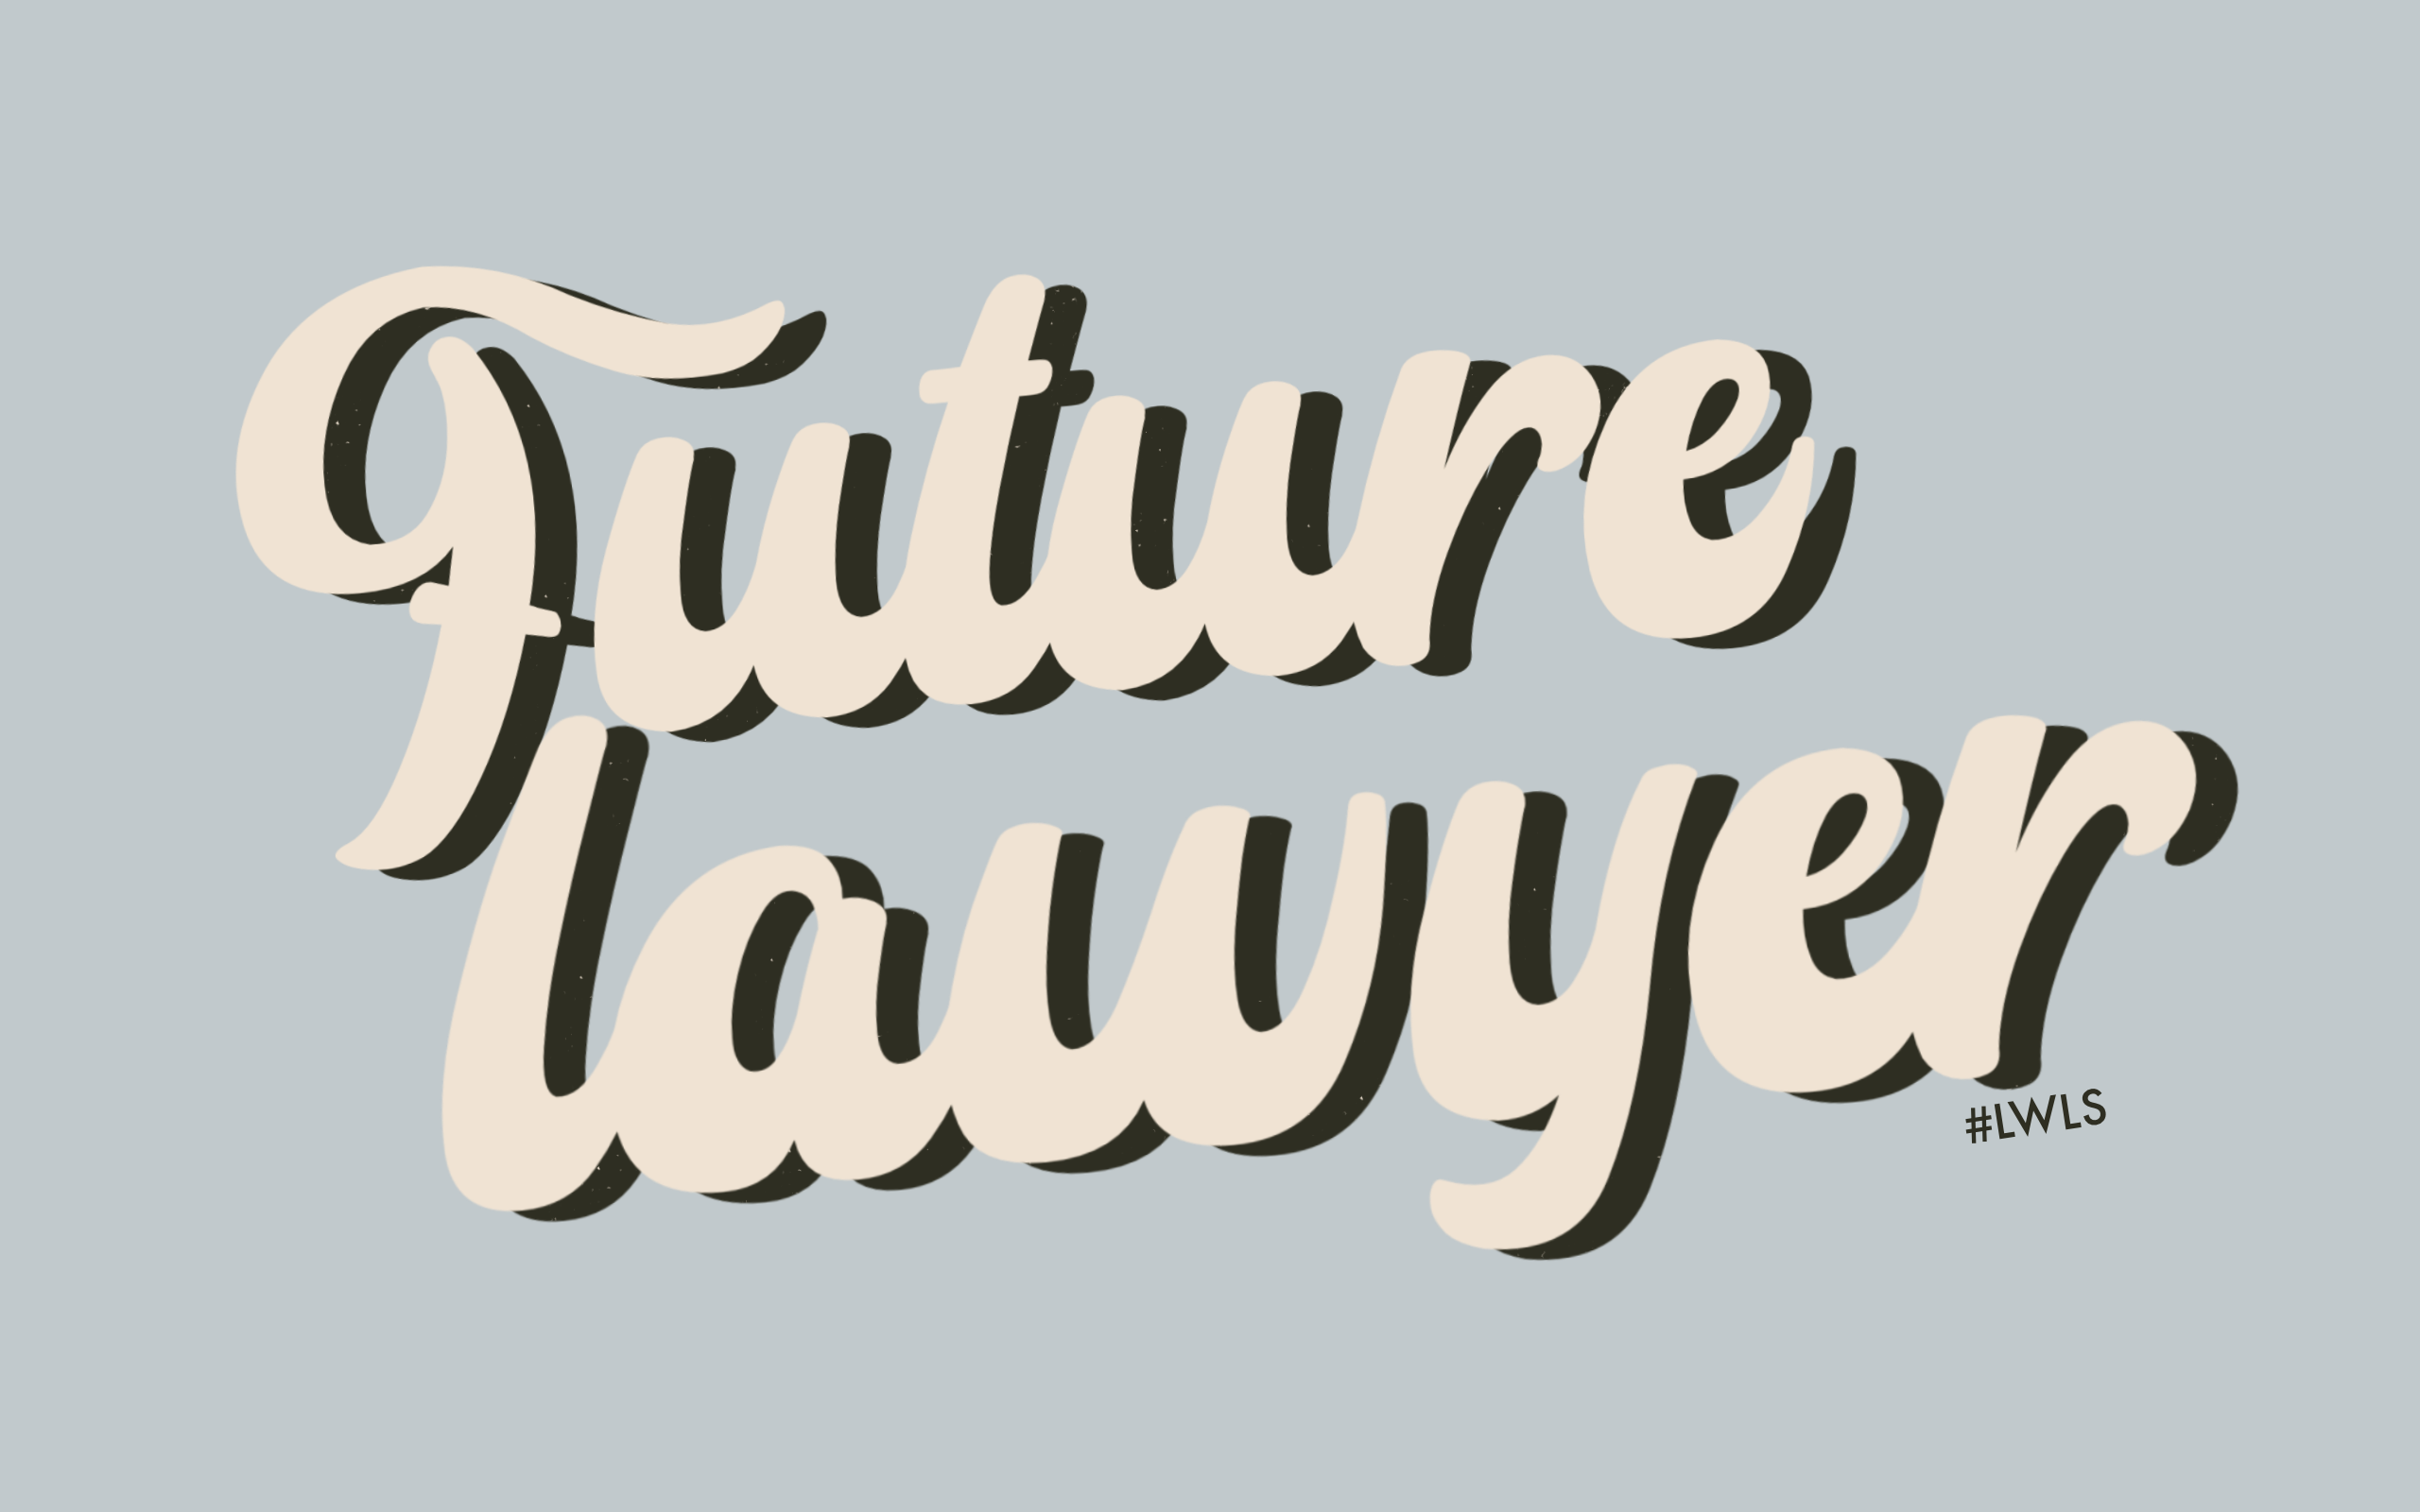 Lawyer Aesthetic Wallpapers Wallpaper Cave